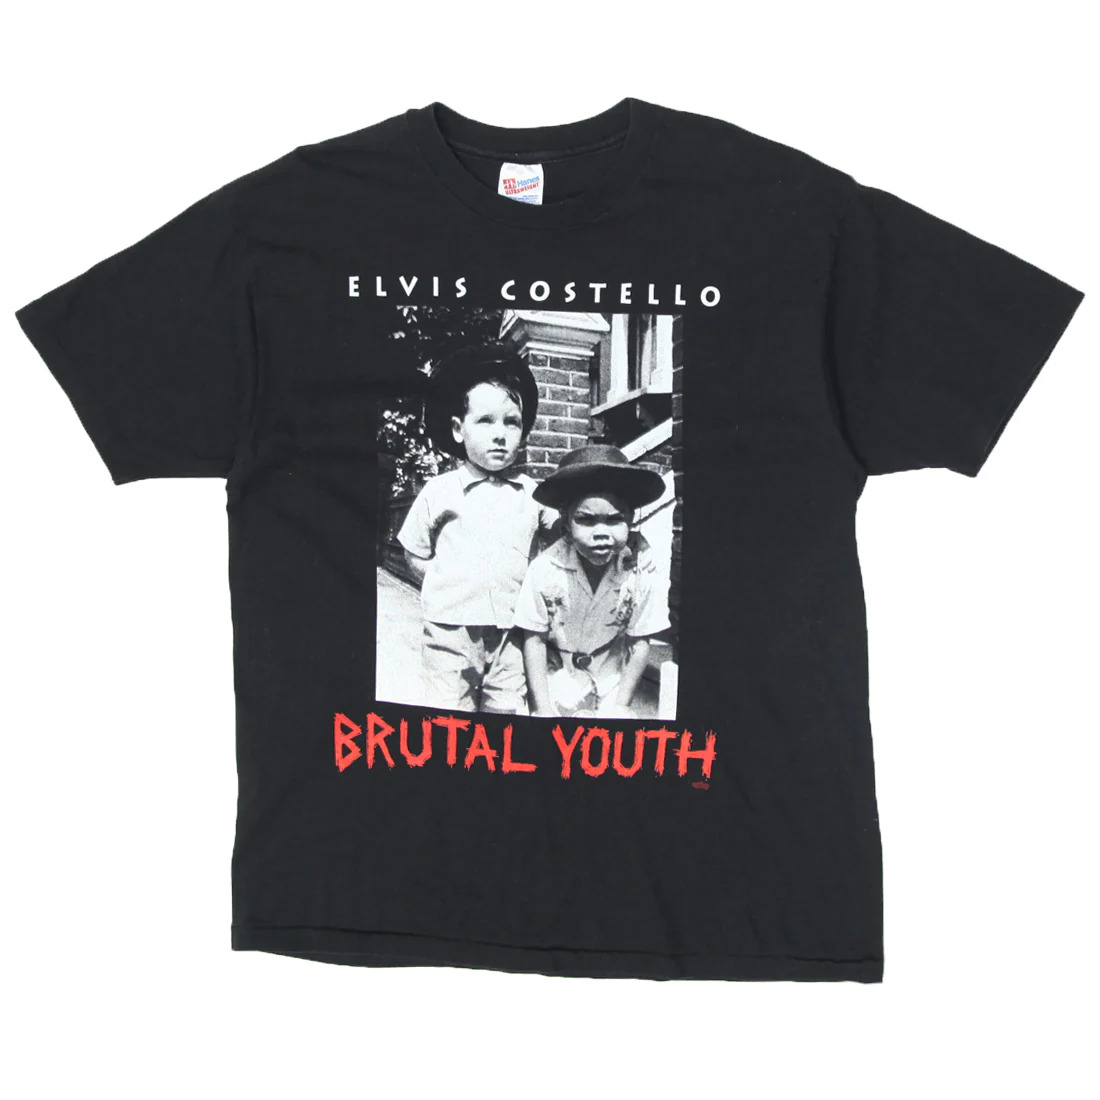 Vintage Elvis Costello Brutal Youth T-Shirt S.Stitch Made In USA Hanes Black XL